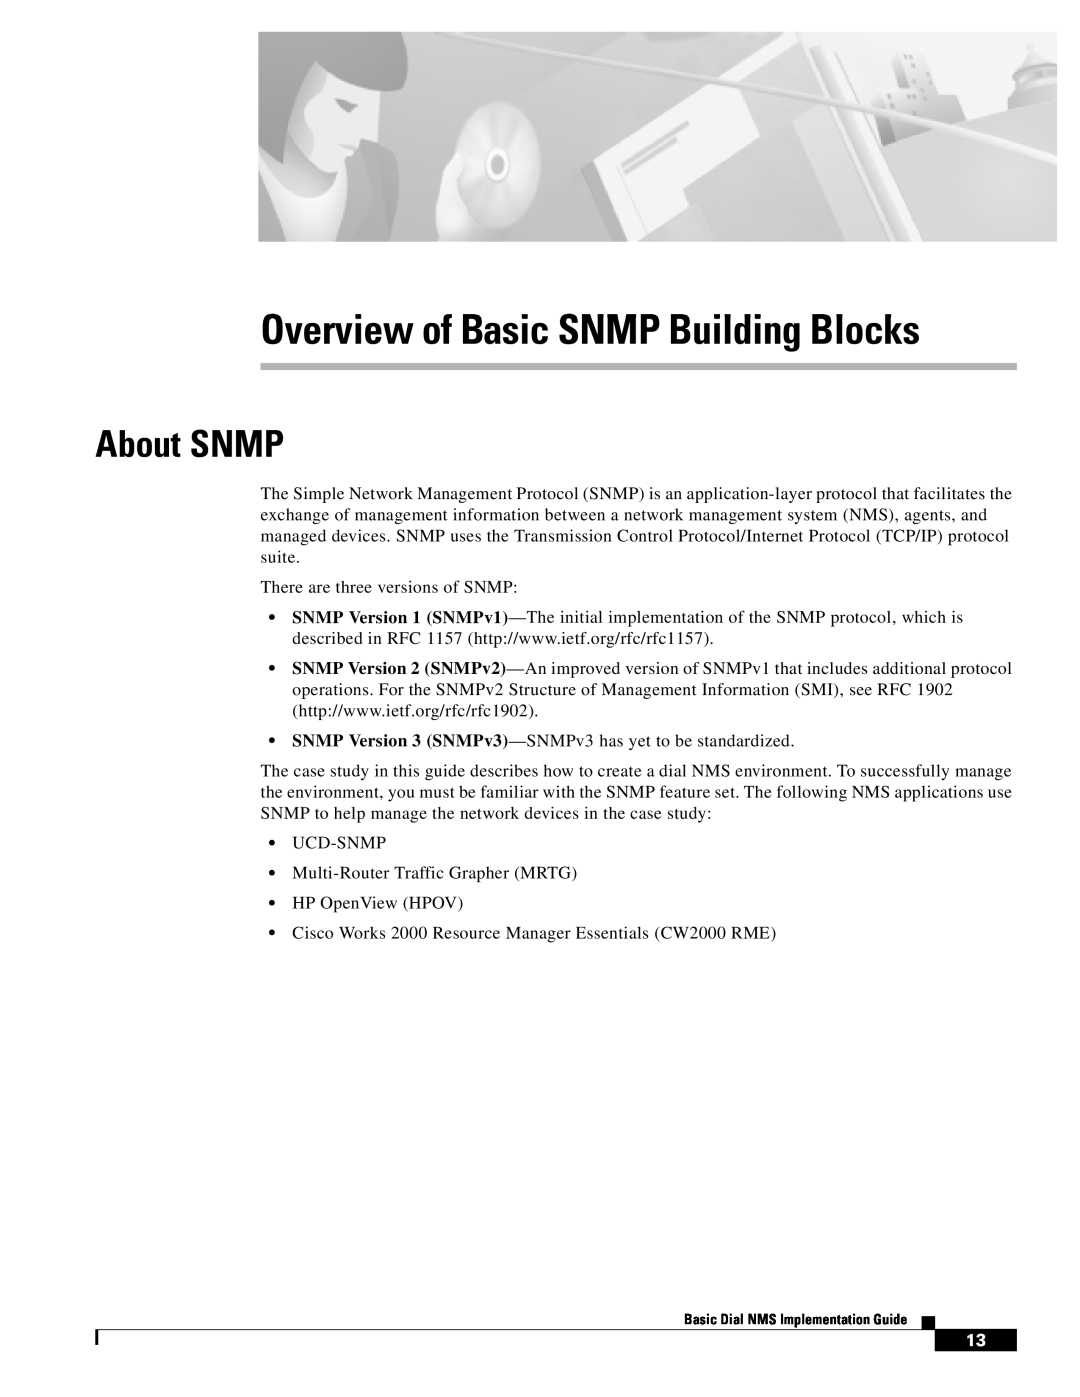 Cisco Systems Dial NMS manual Overview of Basic SNMP Building Blocks, About SNMP 